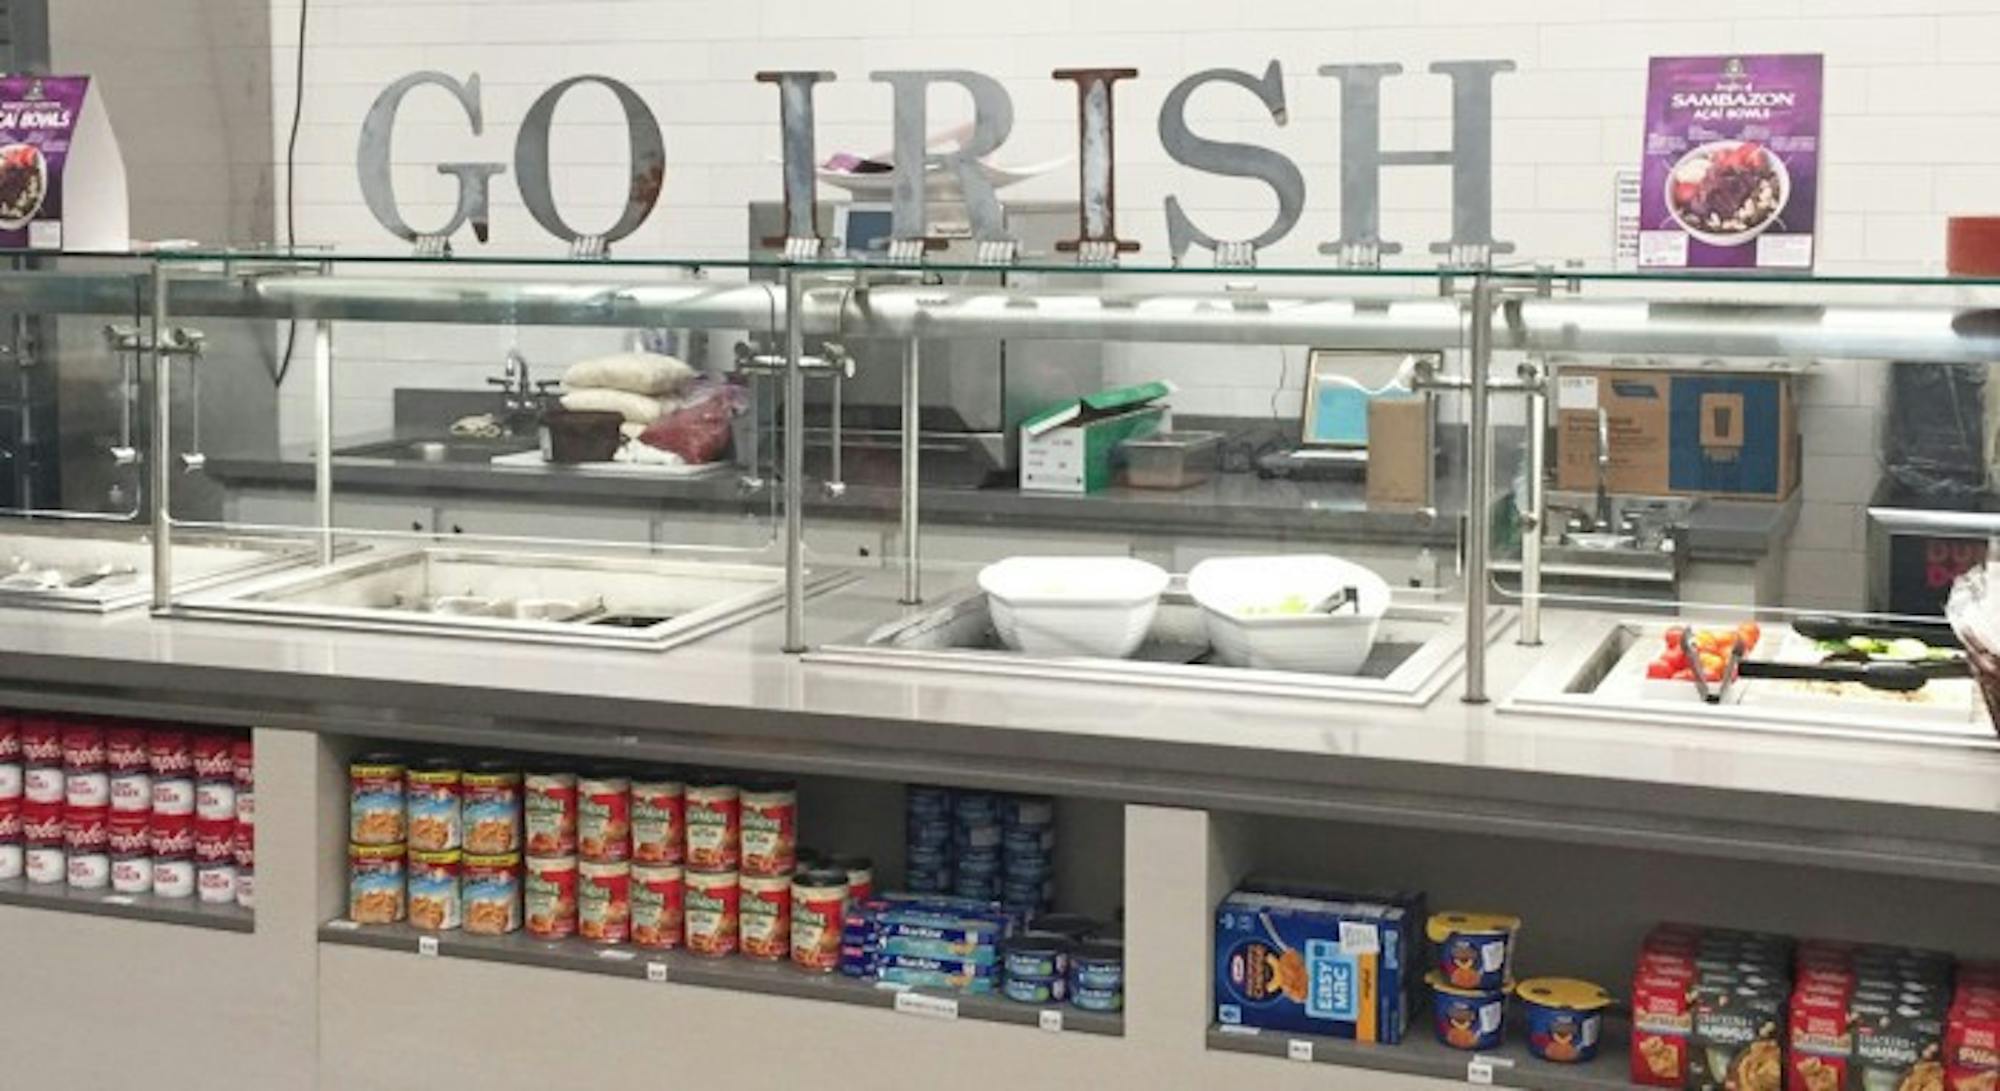 The Marketplace has replaced Grab ’n Go at North Dining Hall. The new dining venue features a la carte snack and meal options, but does not take meal swipes.